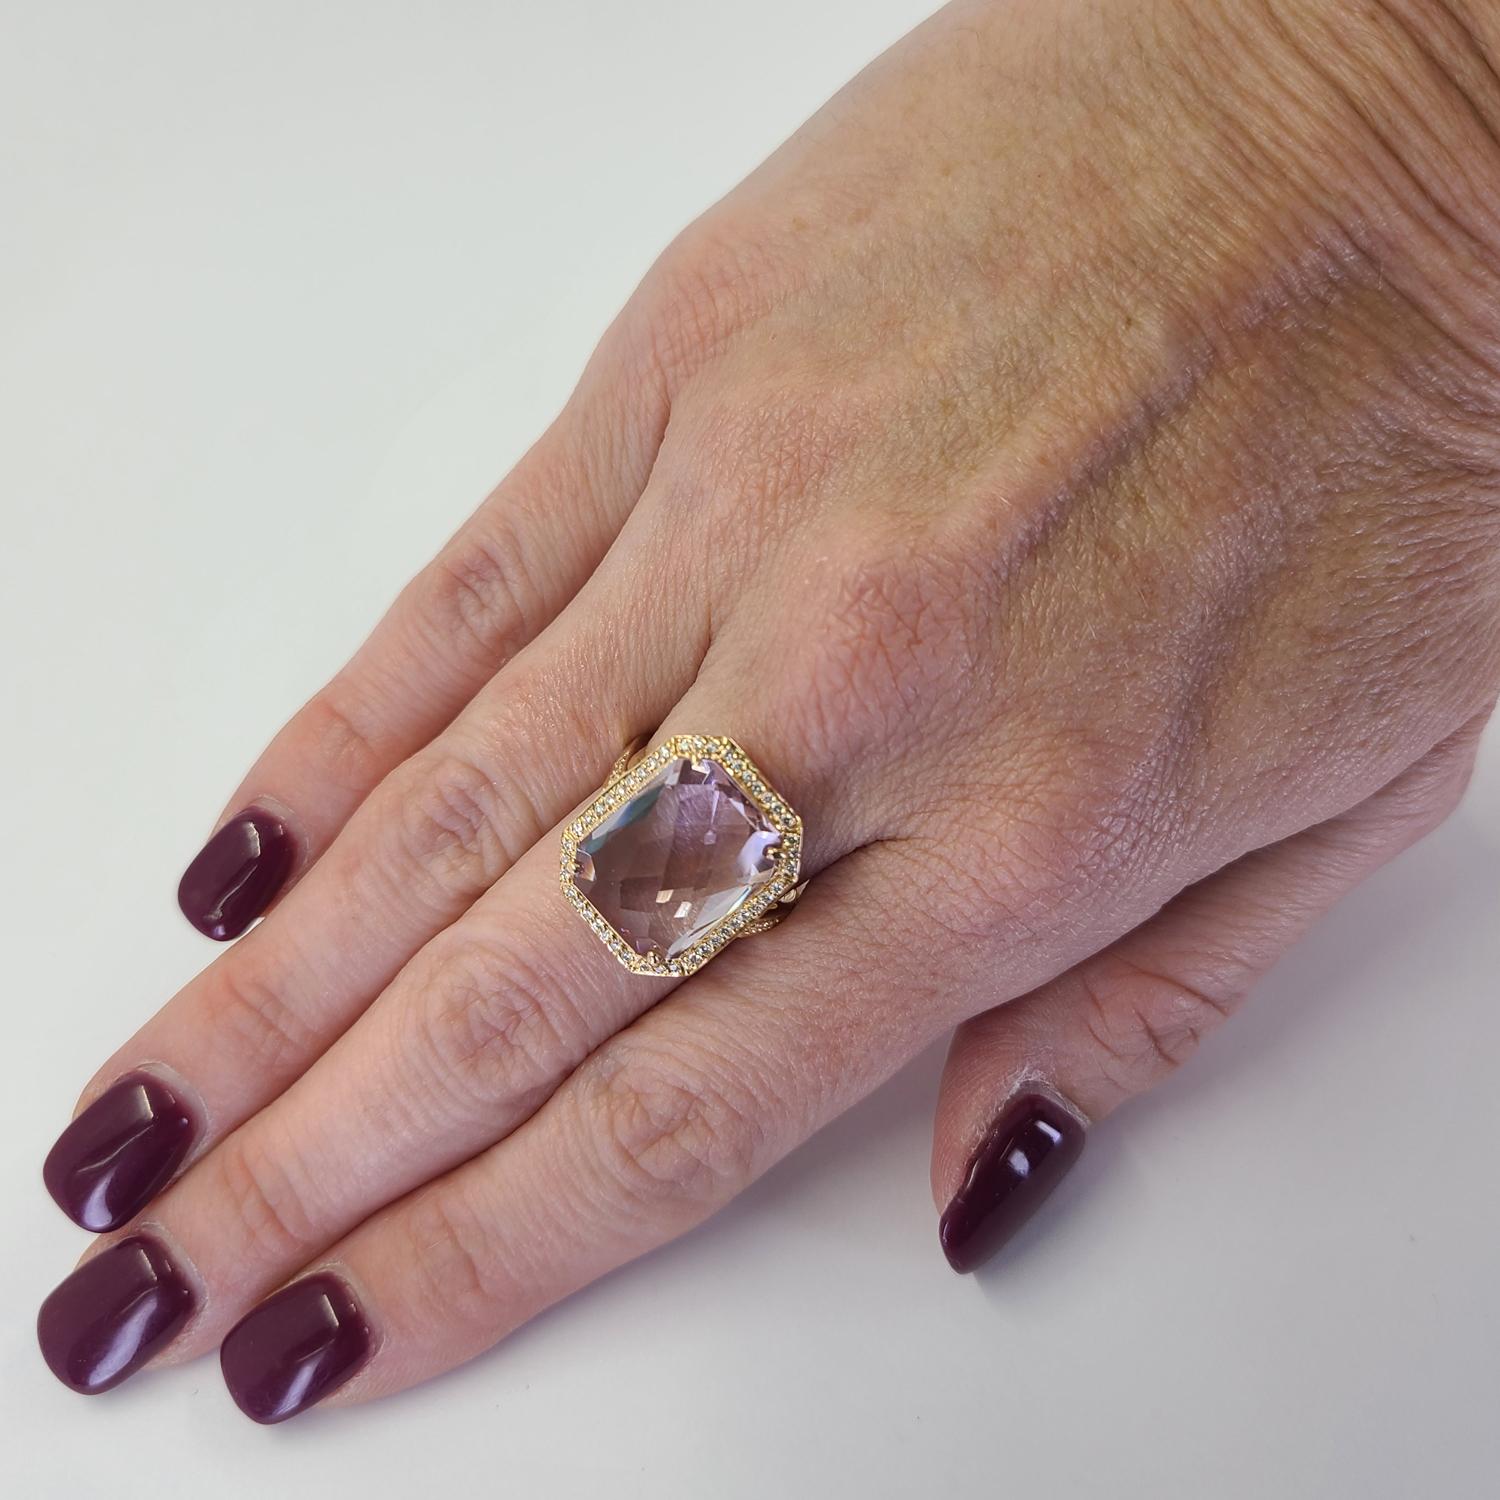 18 Karat Rose Gold Ring Featuring A 15mm x 11.75mm Cushion Cut Checkerboard Lavender Amethyst Accented By 52 Round Brilliant Cut Diamonds of SI Clarity and G/H Color Totaling 0.26 Carats. Finger Size 7; Purchase Includes One Sizing Service. Finished